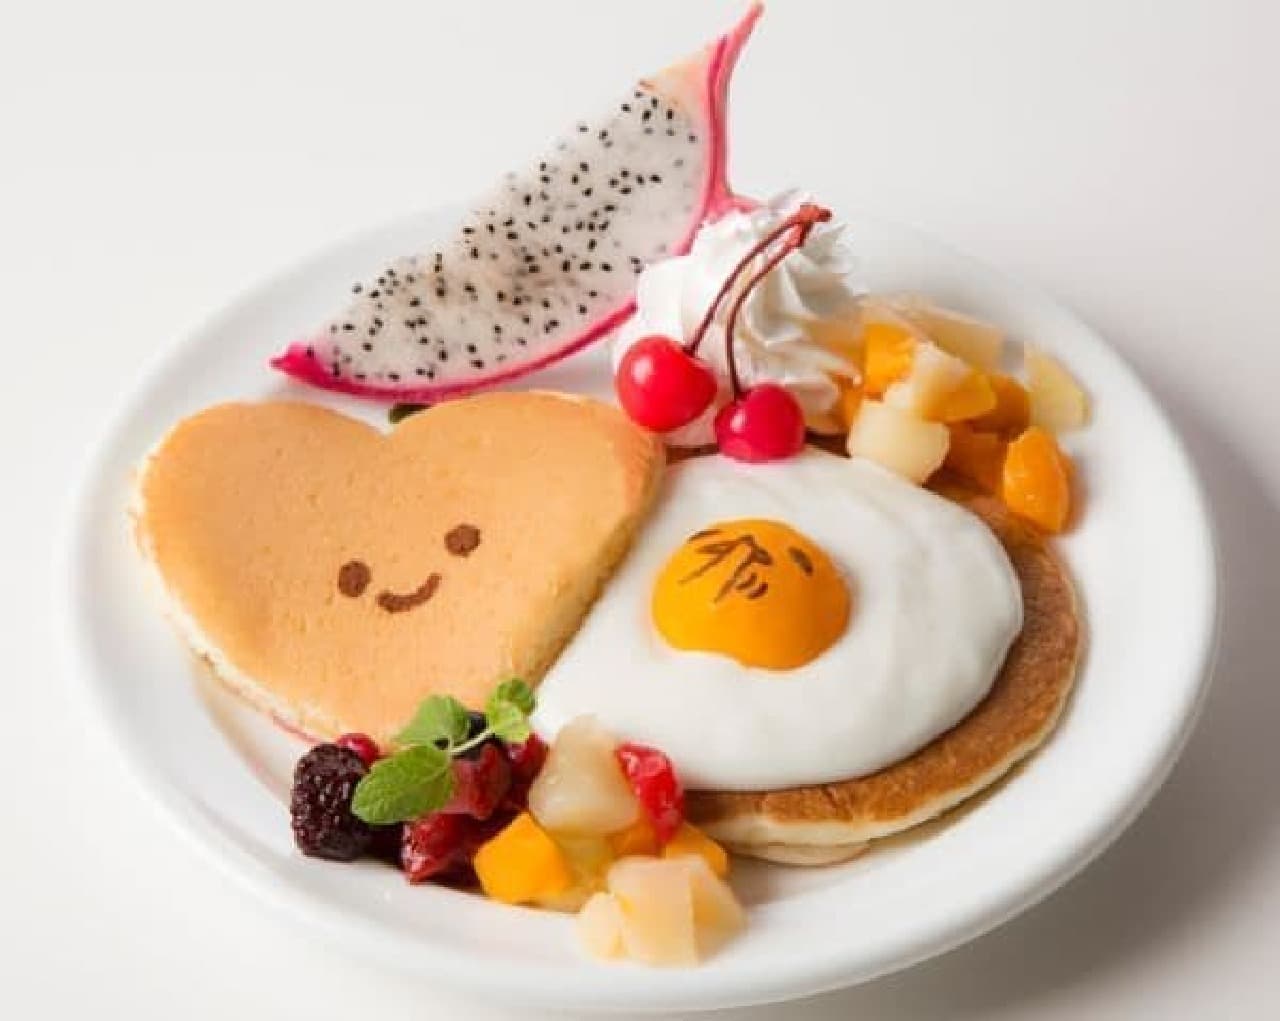 "Gudetama x CAFE Costa Mesa" is a collaboration between Gudetama and "CAFE Costa Mesa", a cafe with the image of the West Coast.